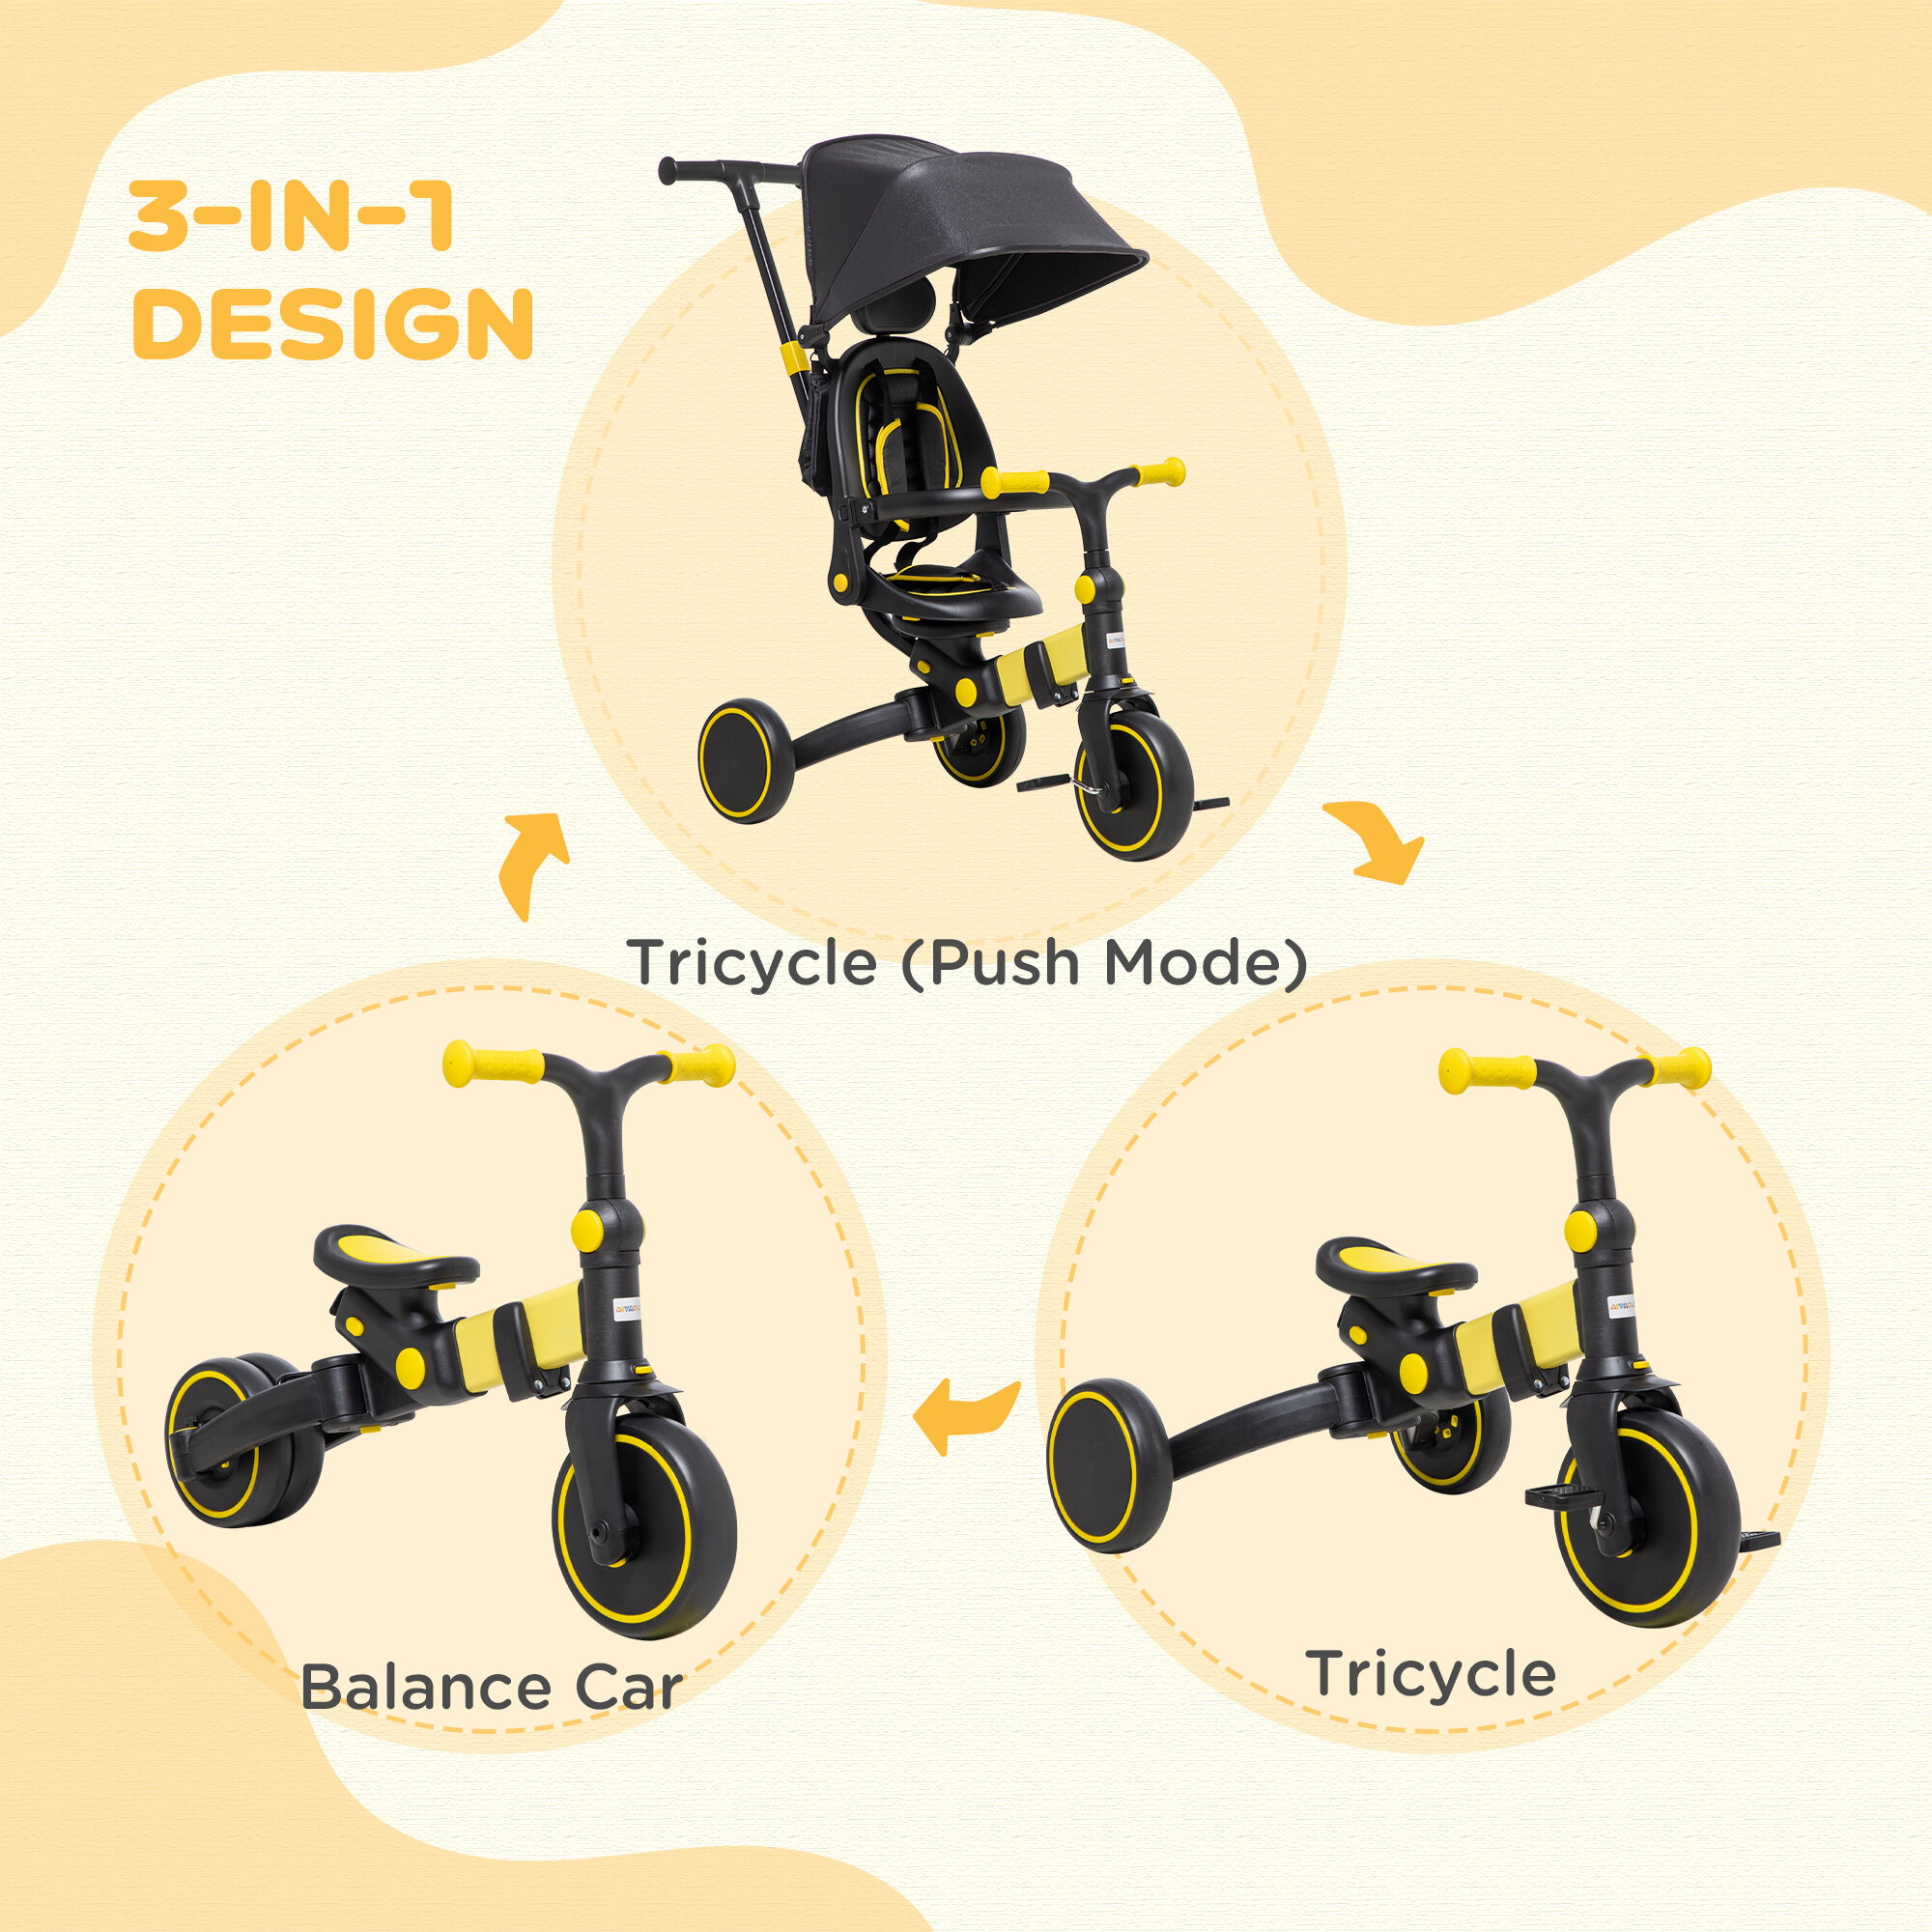 AIYAPLAY 3 in 1 Baby Trike, Tricycle for Kids w/ Adjustable Push Handle - Yellow